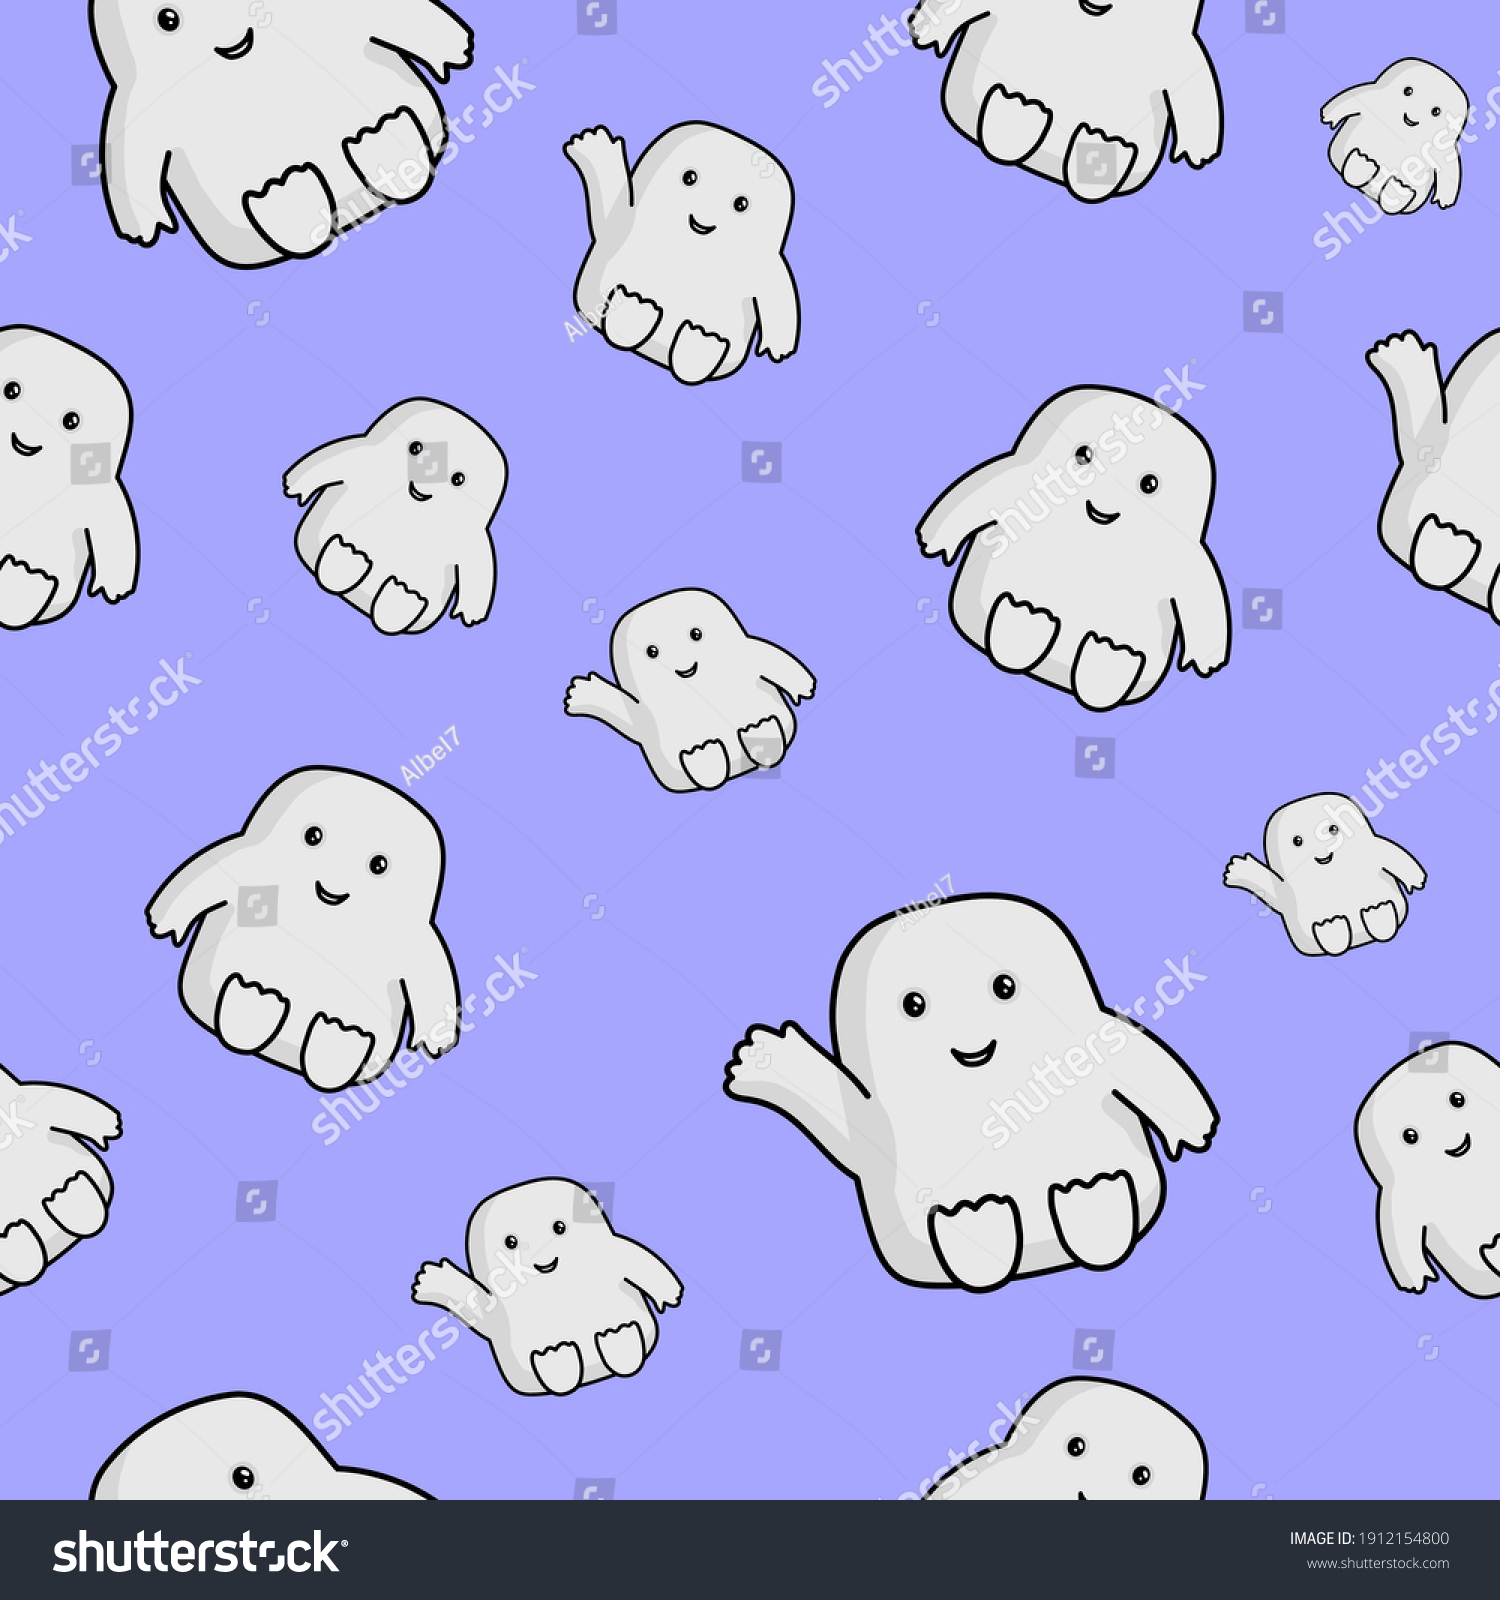 SVG of Cute seamless pattern with character Adipose from Doctor Who Series. svg